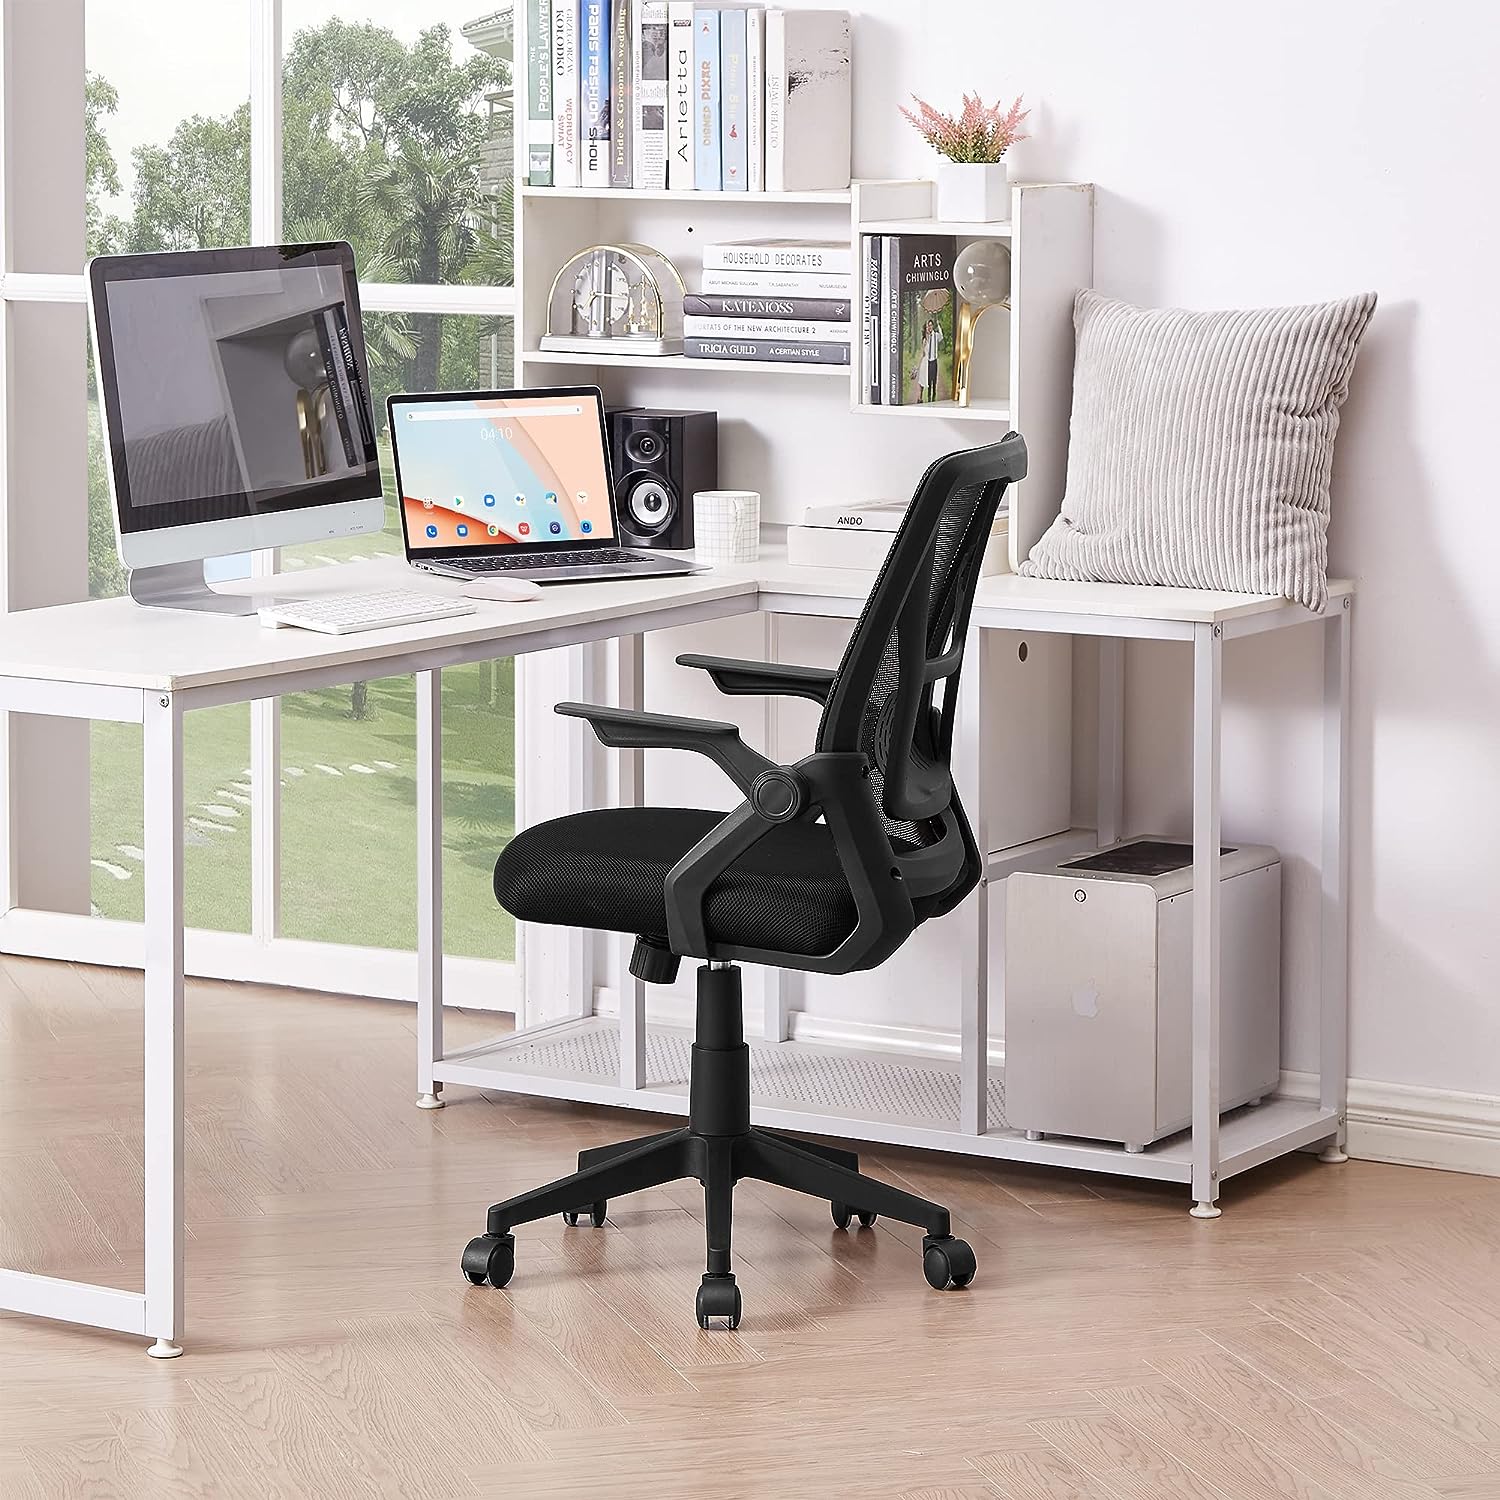 Compact Ergonomic Chair Back Support, Lumbar Support For Good